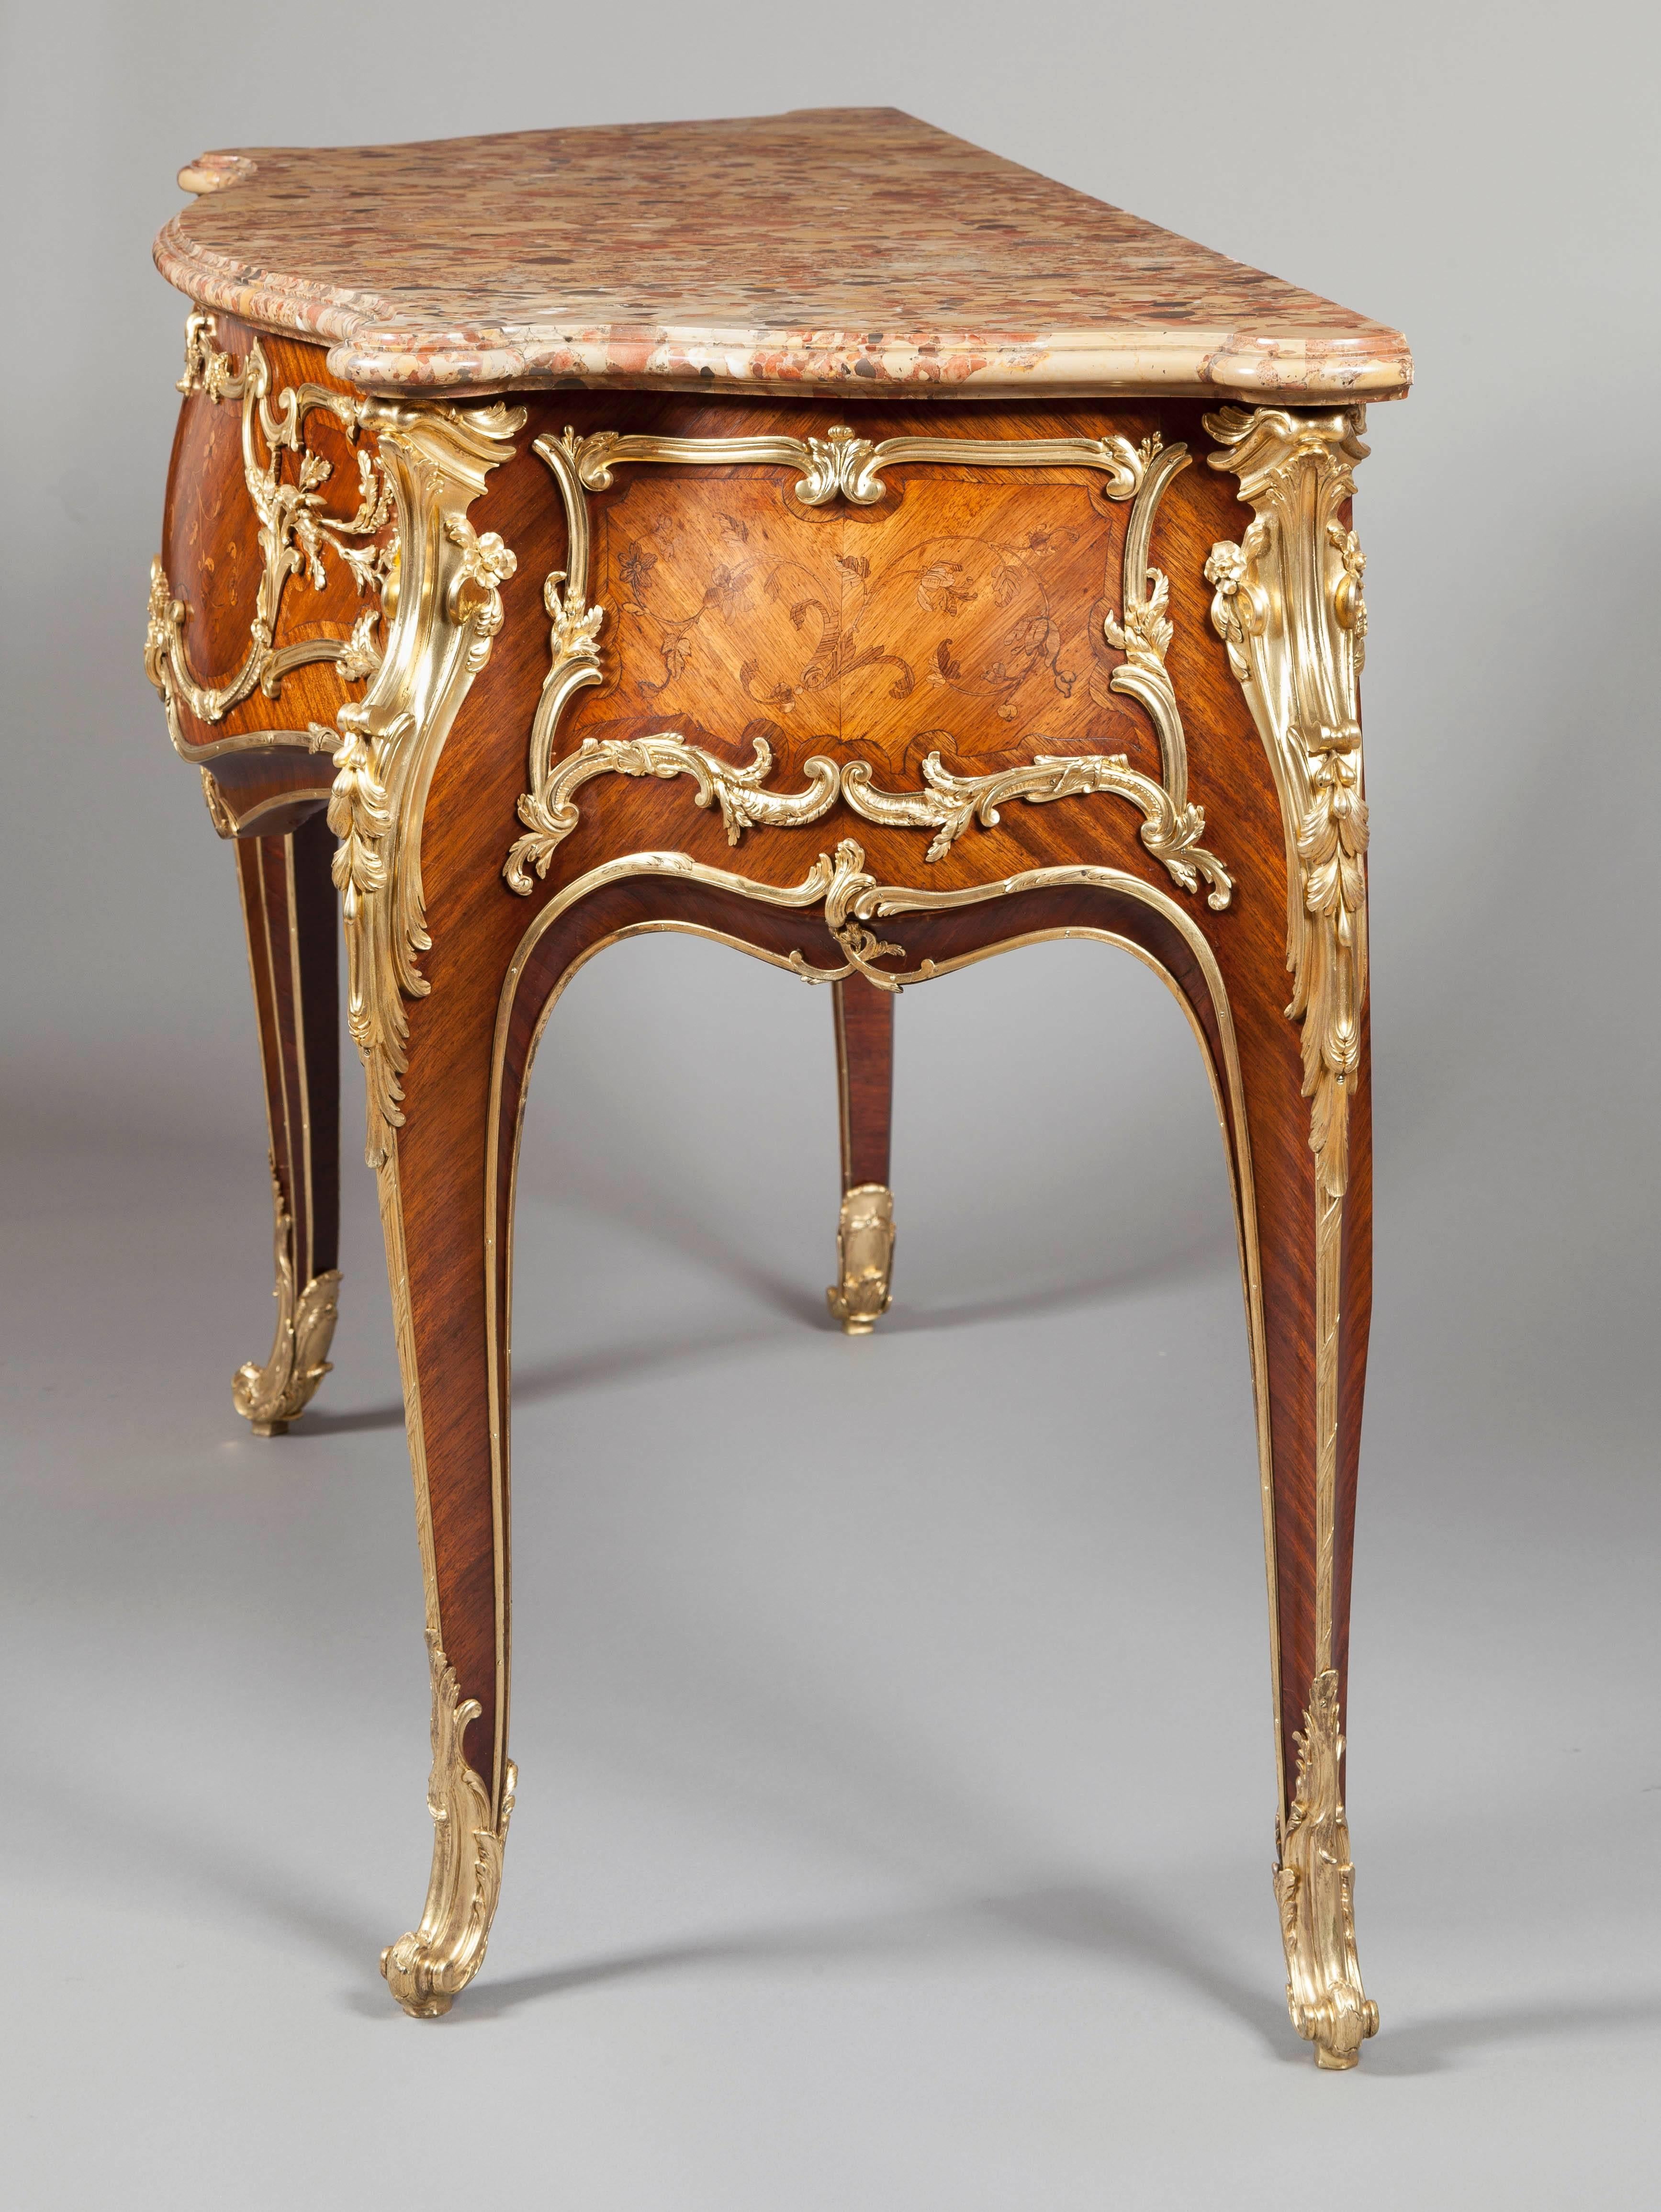 
A French commode in the Louis XV manner Attributed to J.E. Zwiener

of serpentine fronted, ‘sauteuse’ form, constructed in kingwood with fine marquetry foliate work, and dressed with gilt bronze mounts; rising from cabriole legs, with the swept